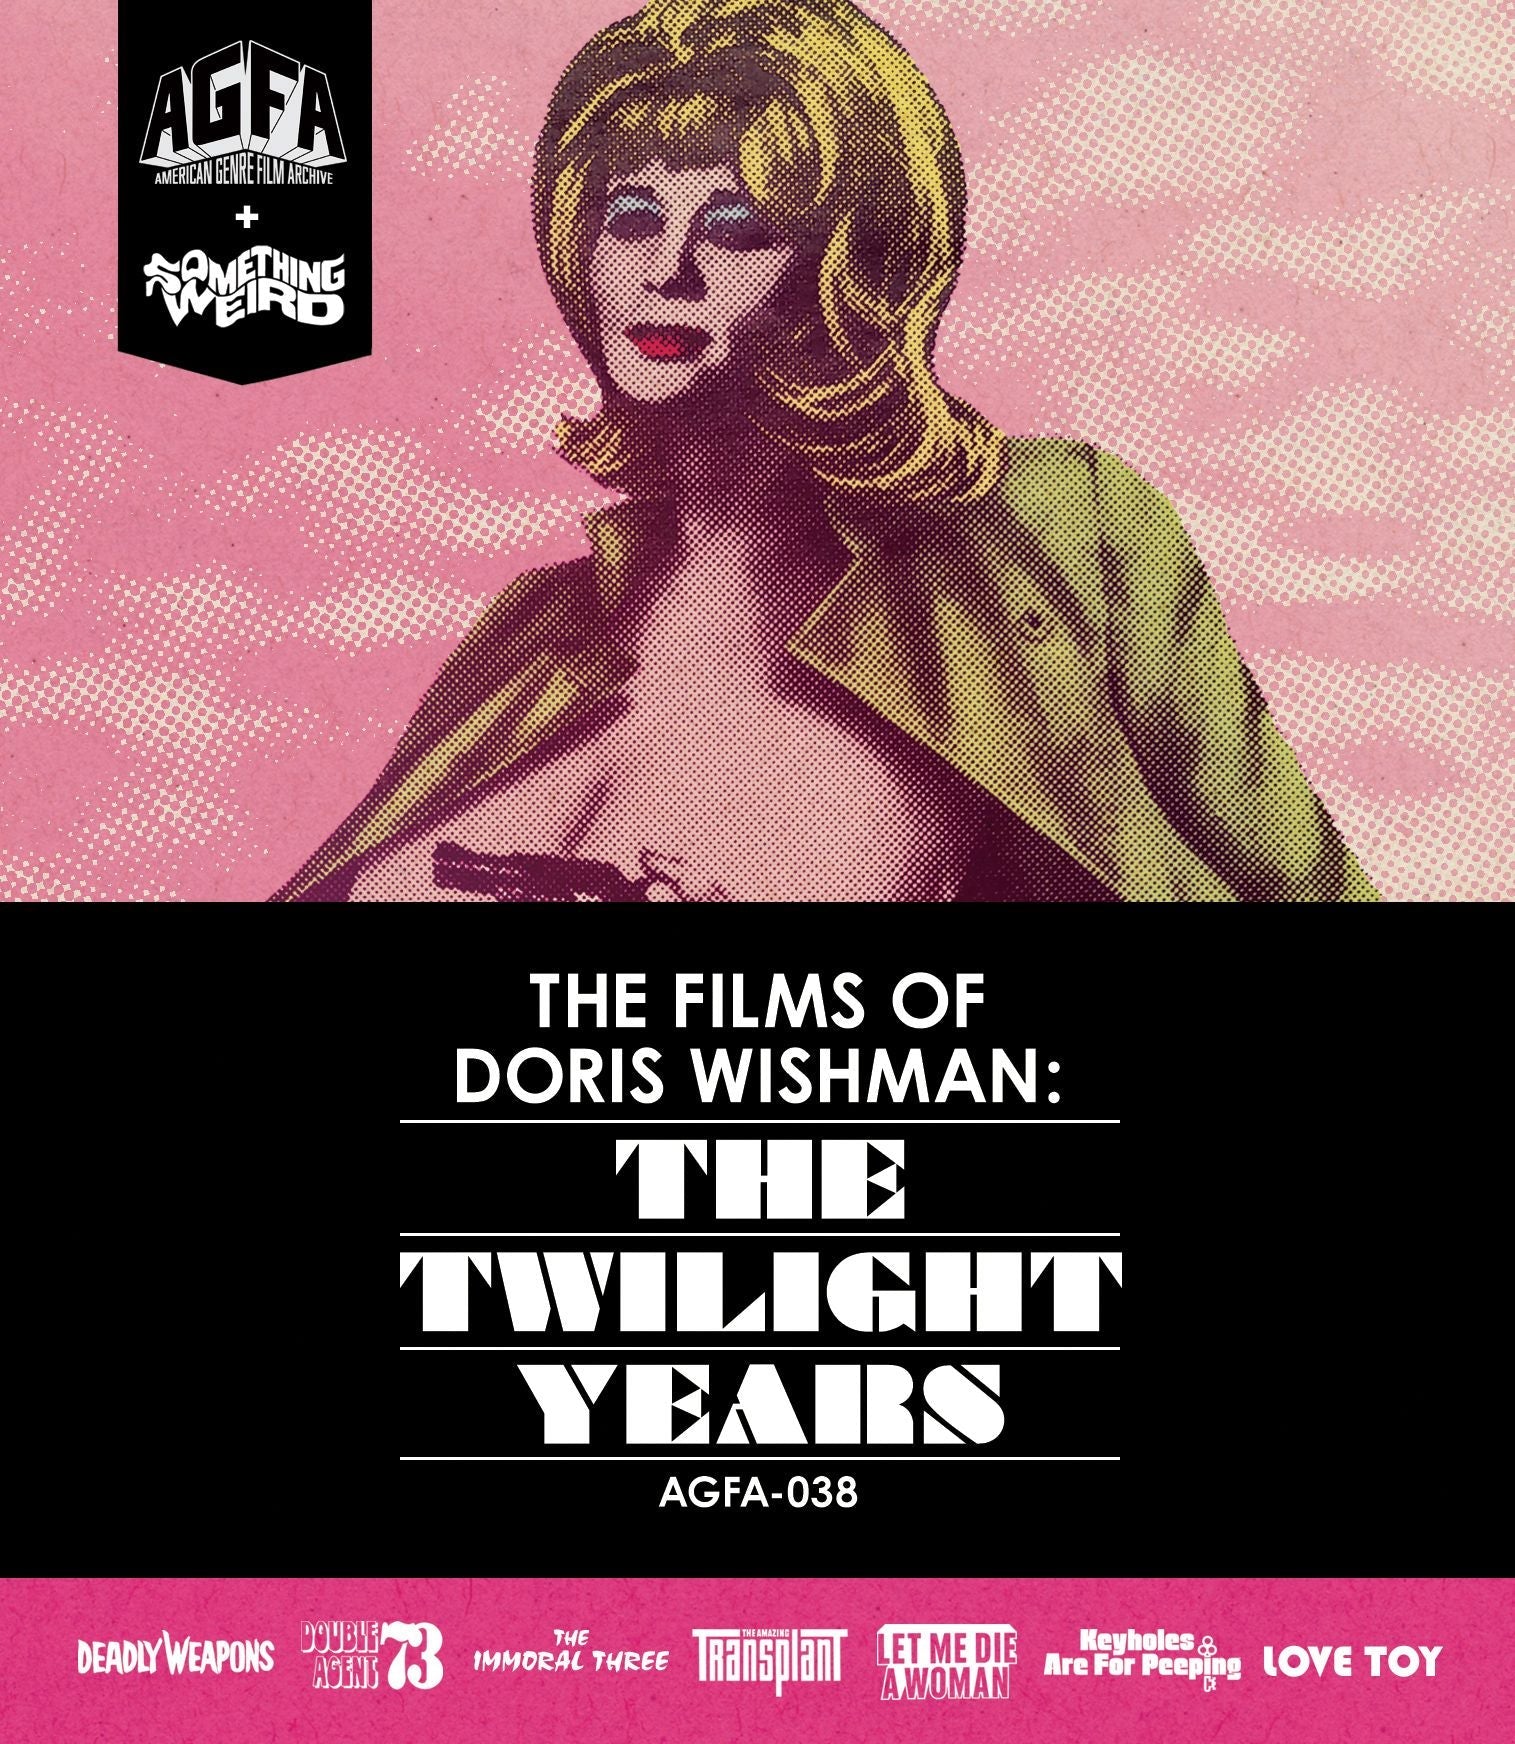 THE FILMS OF DORIS WISHMAN: THE TWILIGHT YEARS (LIMITED EDITION) BLU-RAY